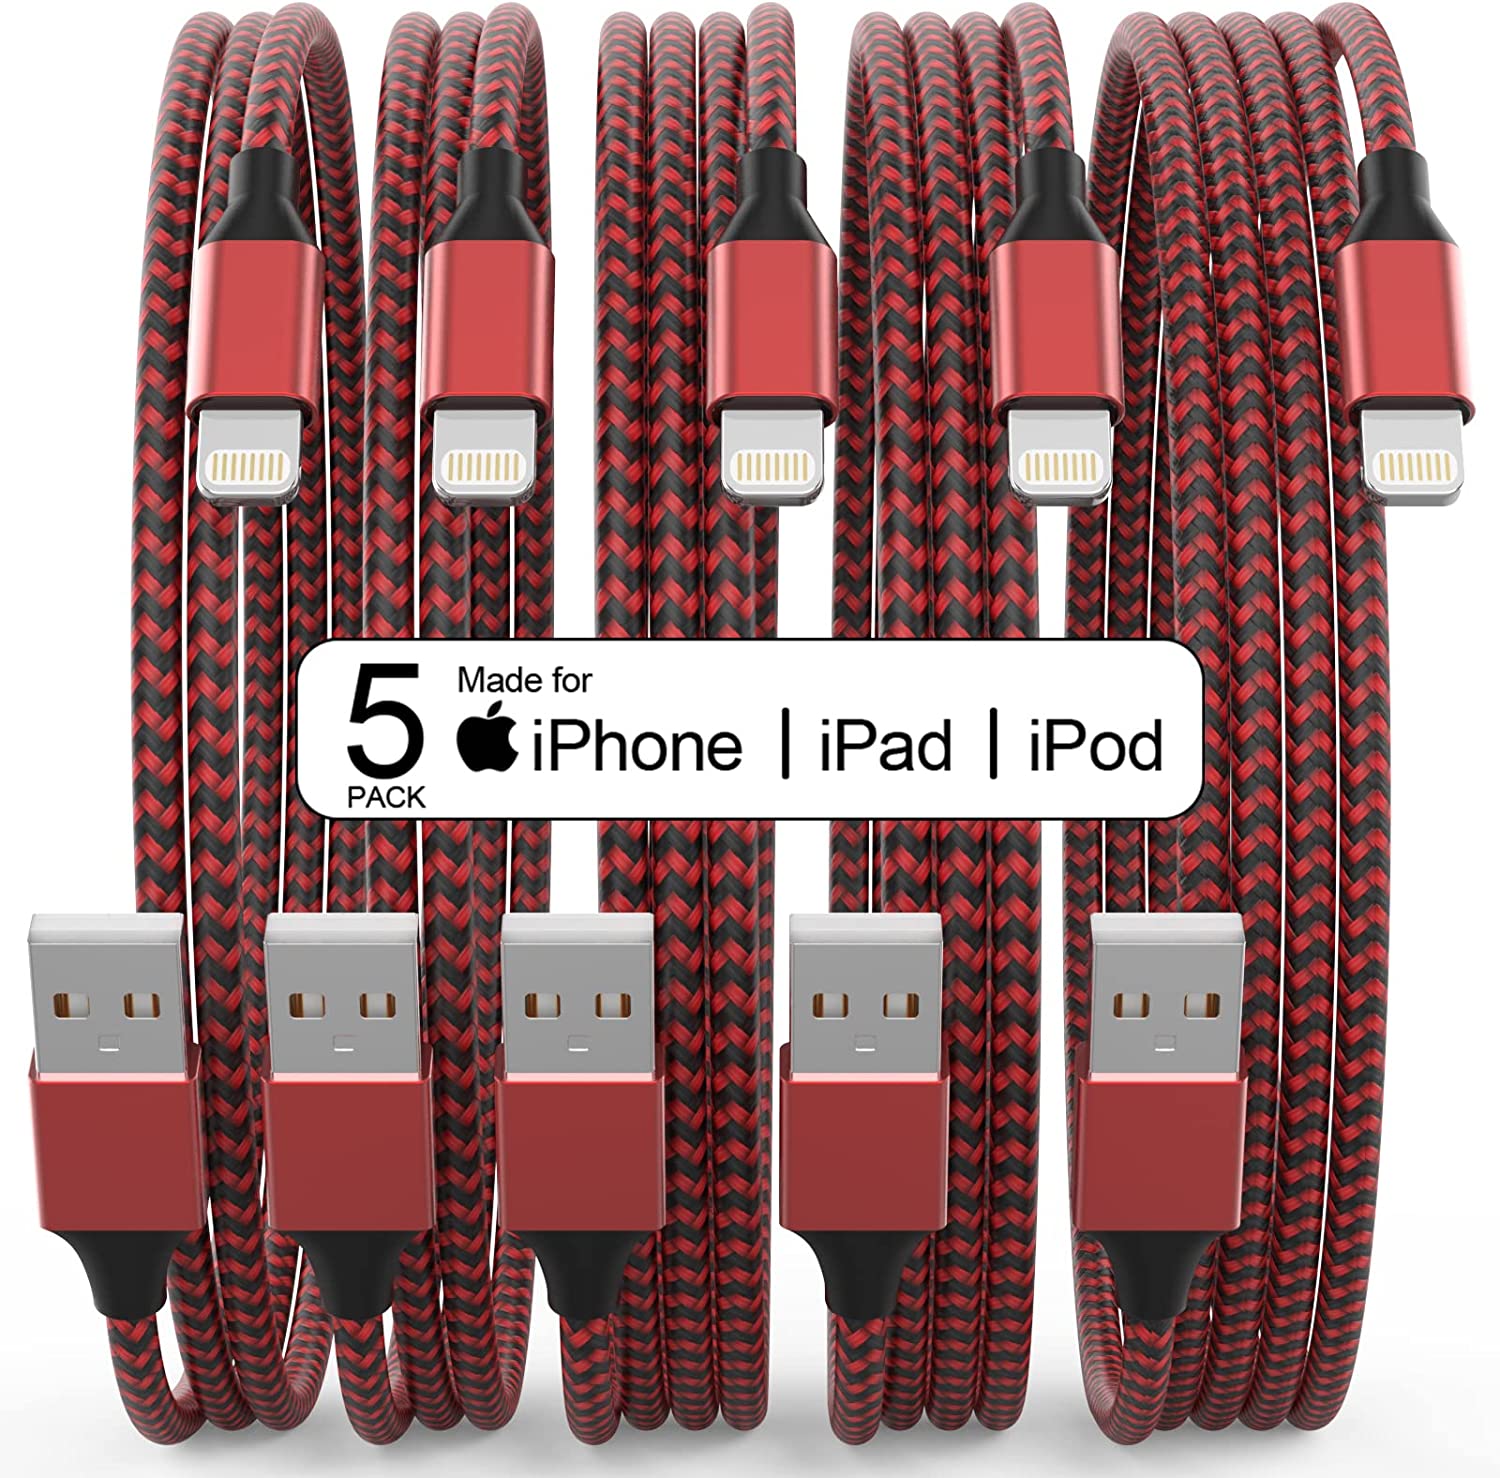 5-Pack Plnhixt Nylon Braided USB-A to Lightning Charging Cables (2x 3', 2x 6' & 1x 10') $6 + Free Shipping w/ Prime or on $25+